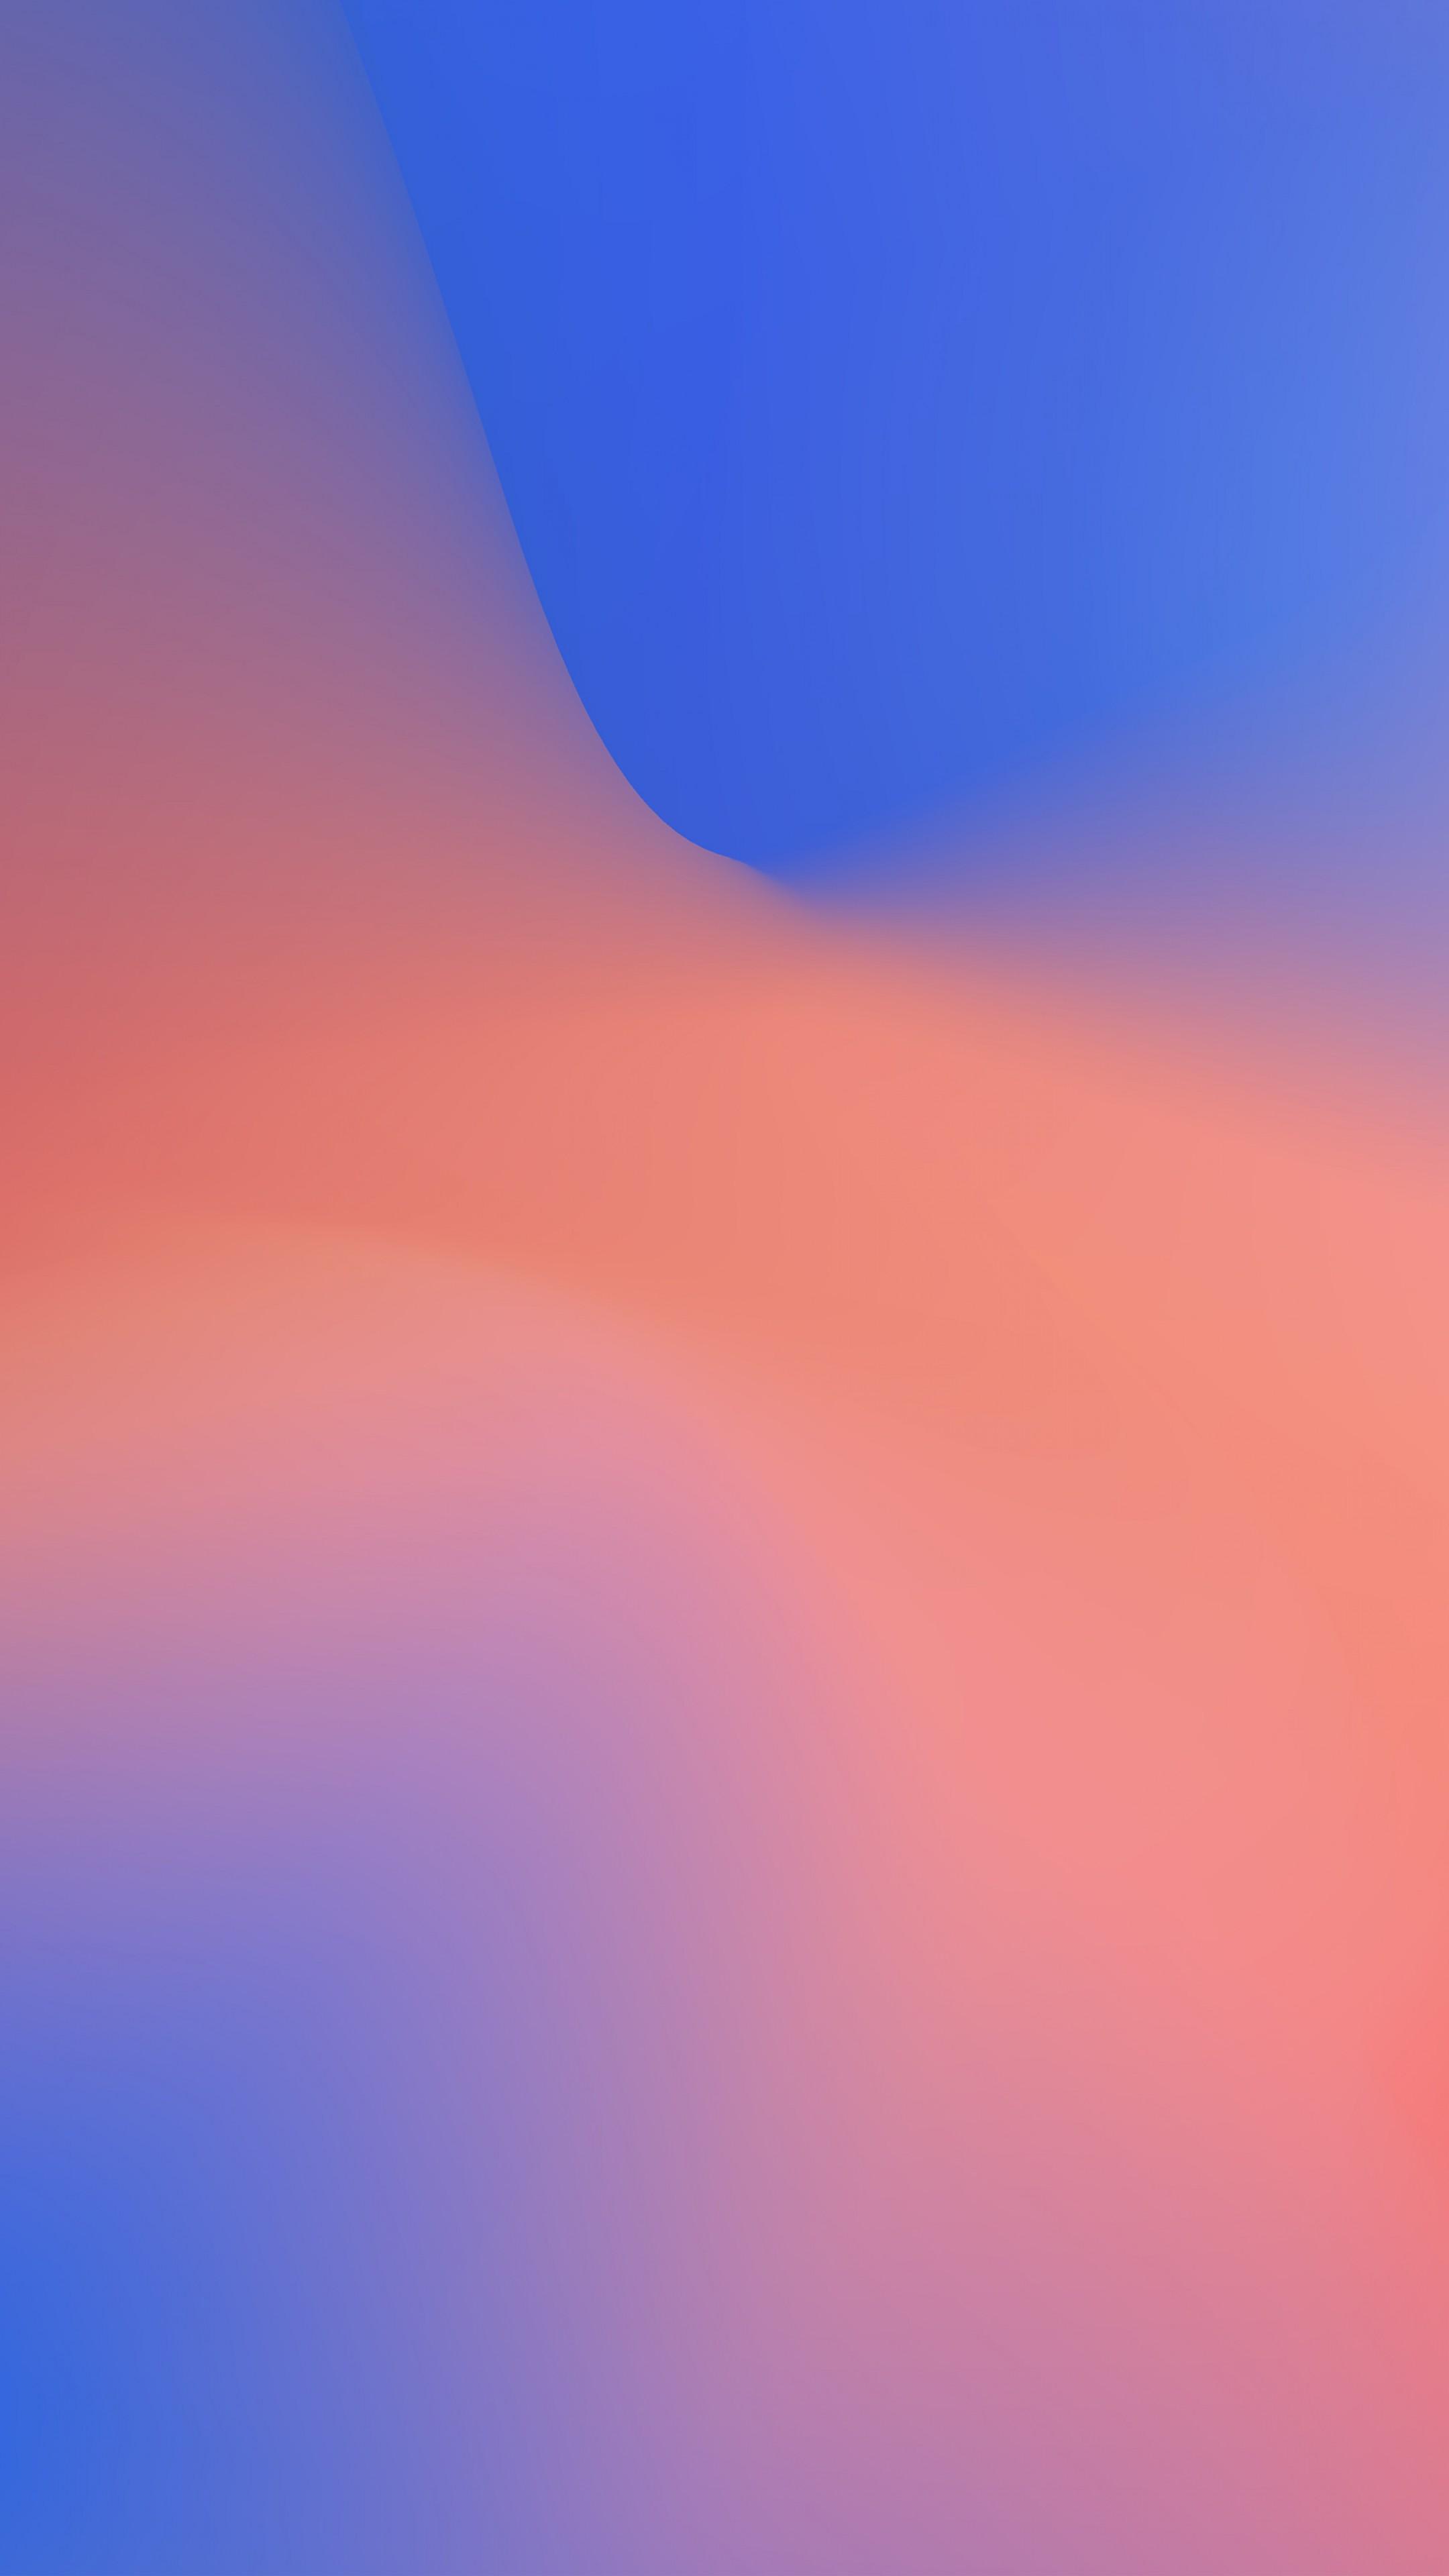 Wallpaper Google Pixel Android 9 Pie, abstract, 4K, OS